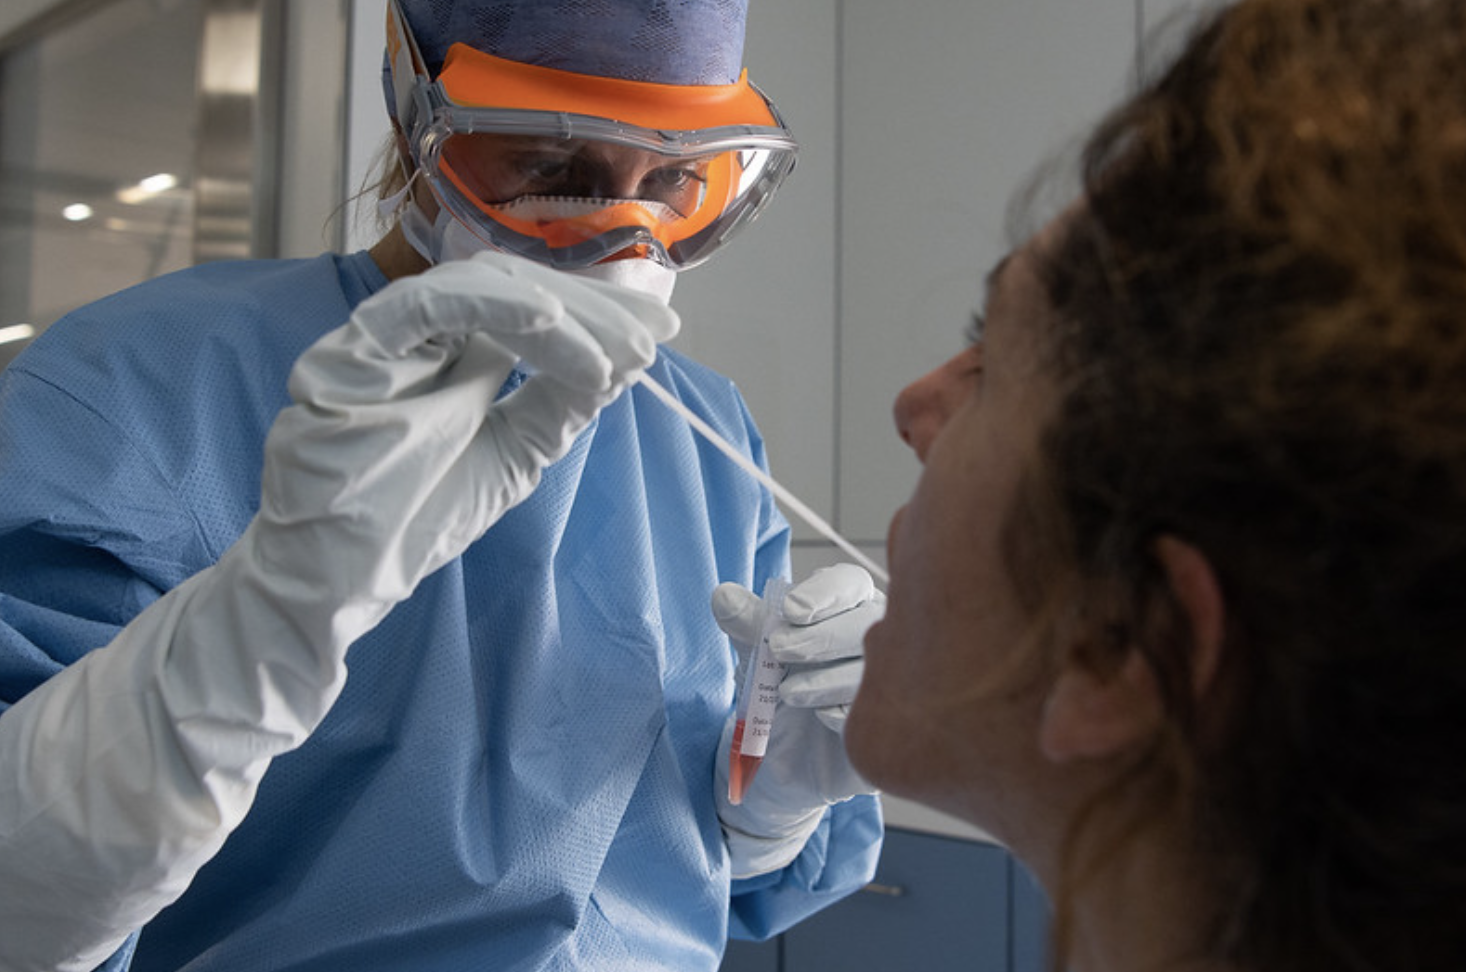 Medic tests a patient for COVID-19, the disease caused by the novel coronavirus, at the Hospital Clinic, Barcelona, Spain, March 18, 2020 (Photo by Hospital Clinic) Creative Commons license via Flickr